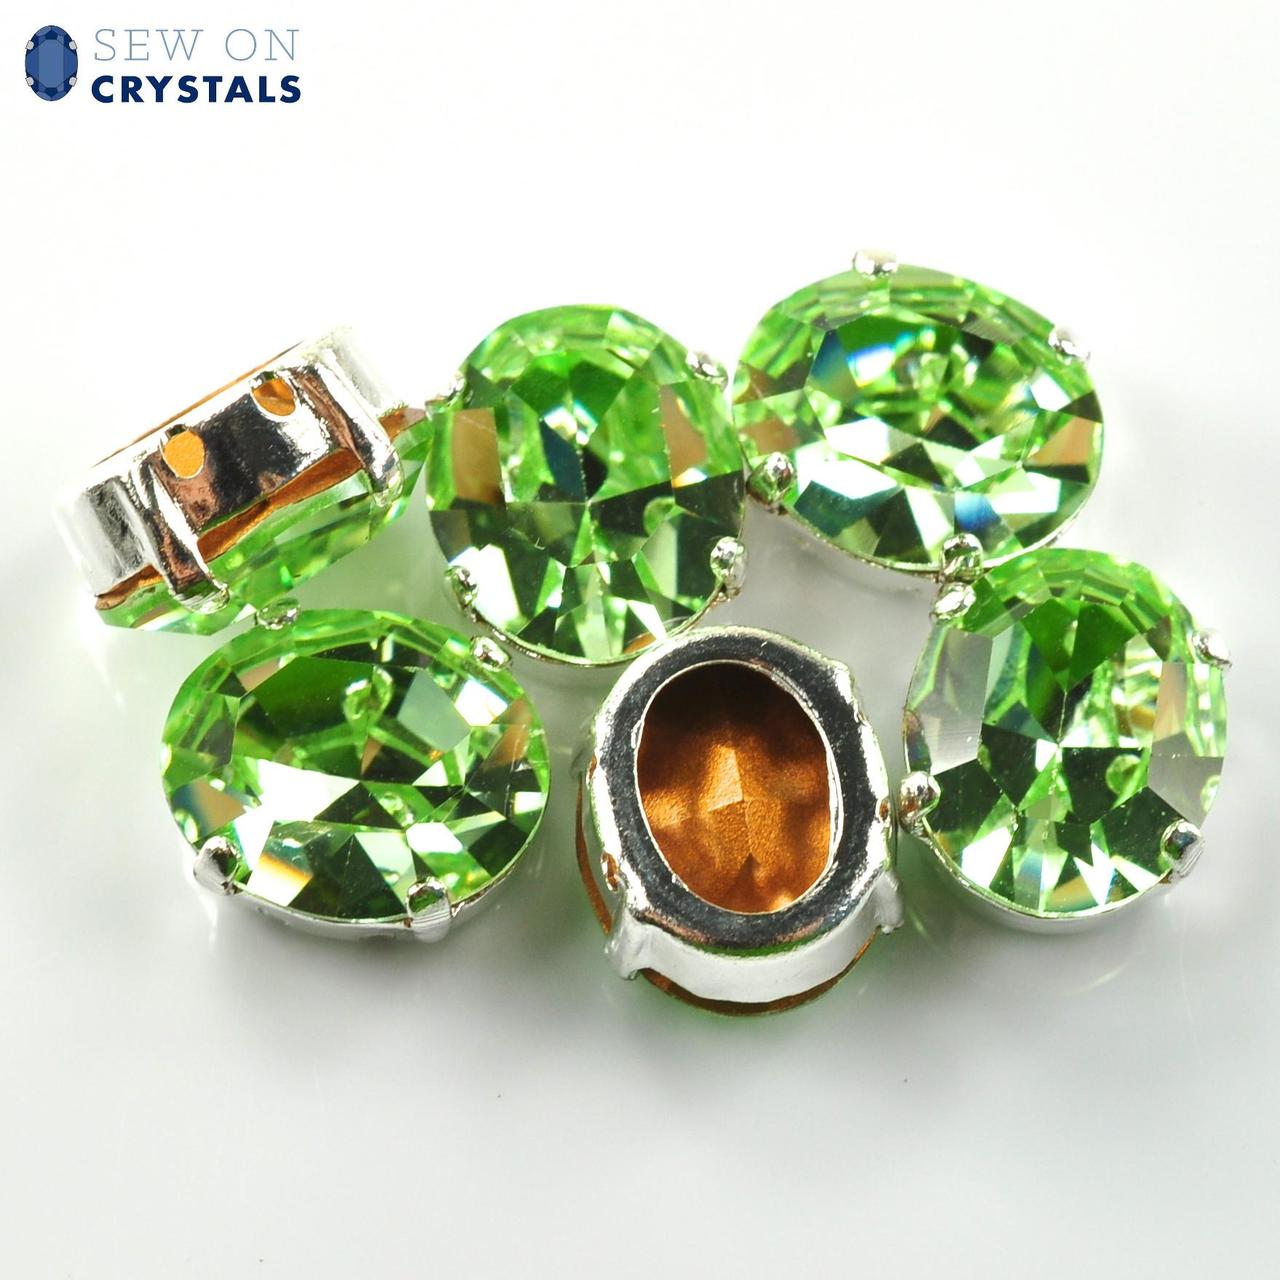 Chrysolite 12x10mm Oval Sew On Crystals - 6 Pieces